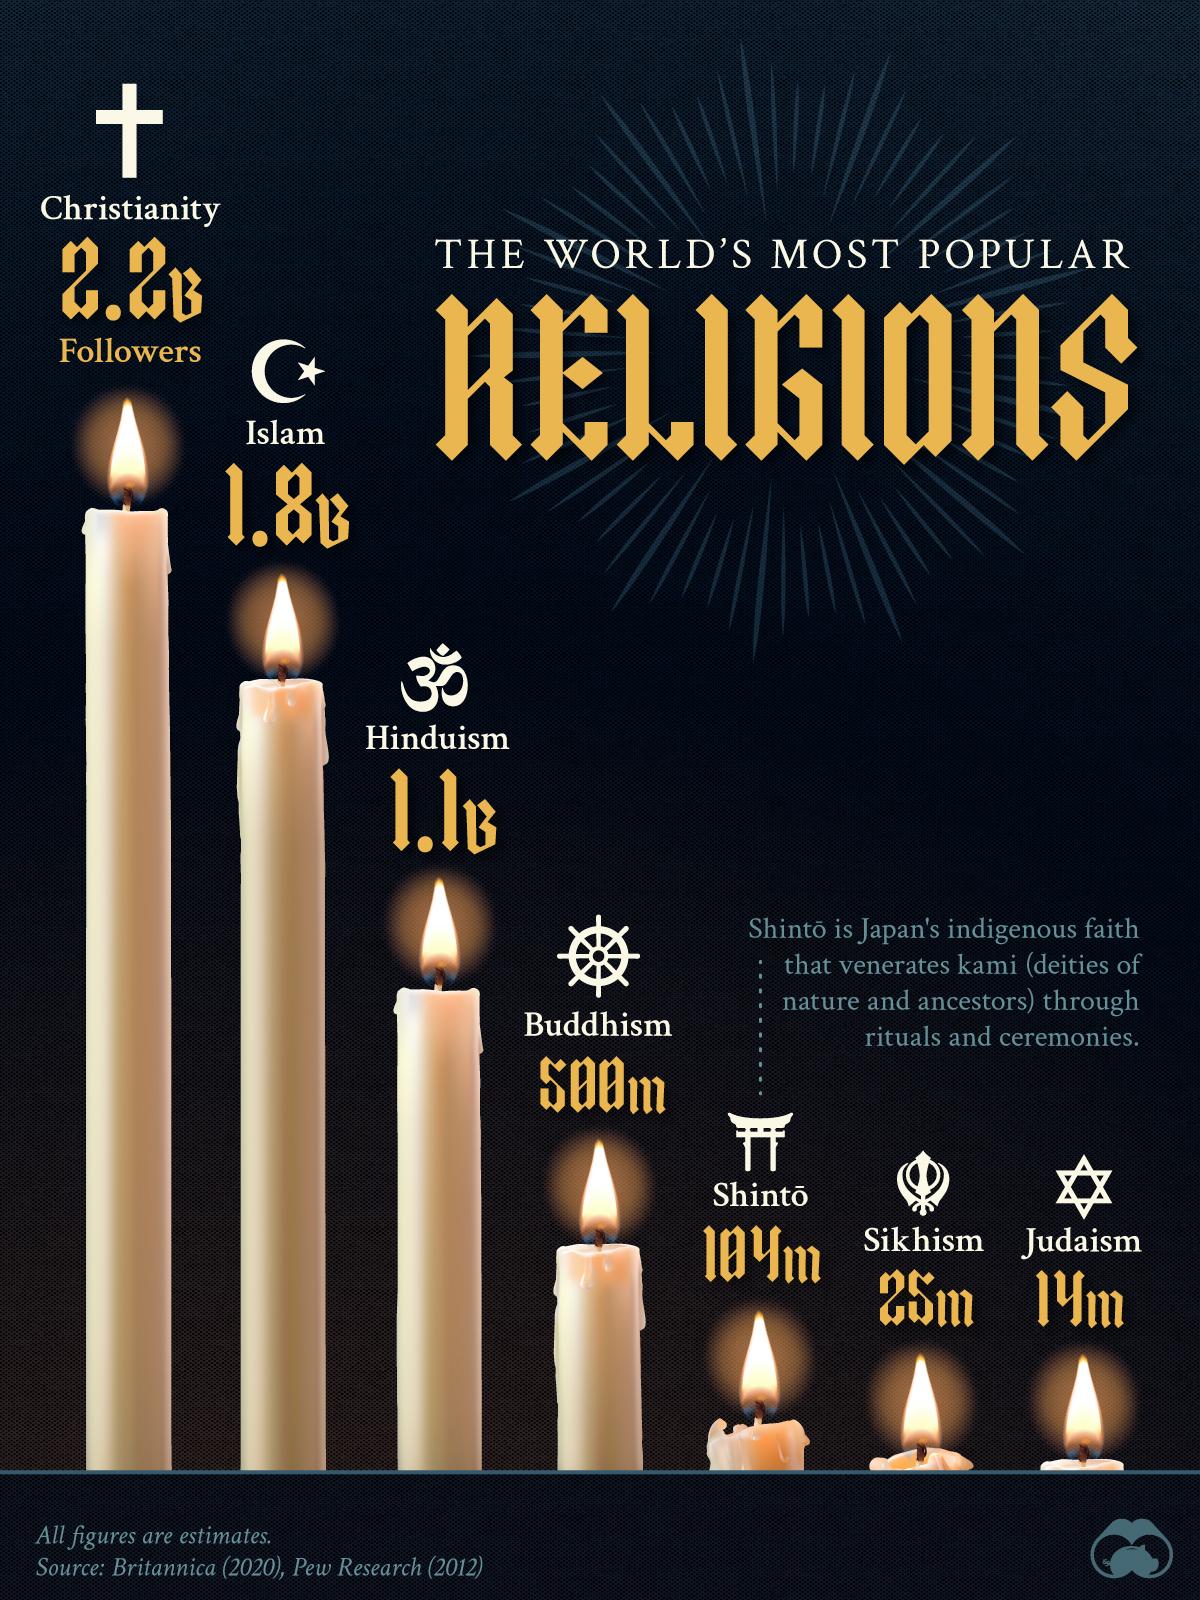 The World’s Three Largest Religions Have a Combined 5 Billion Followers 🙏